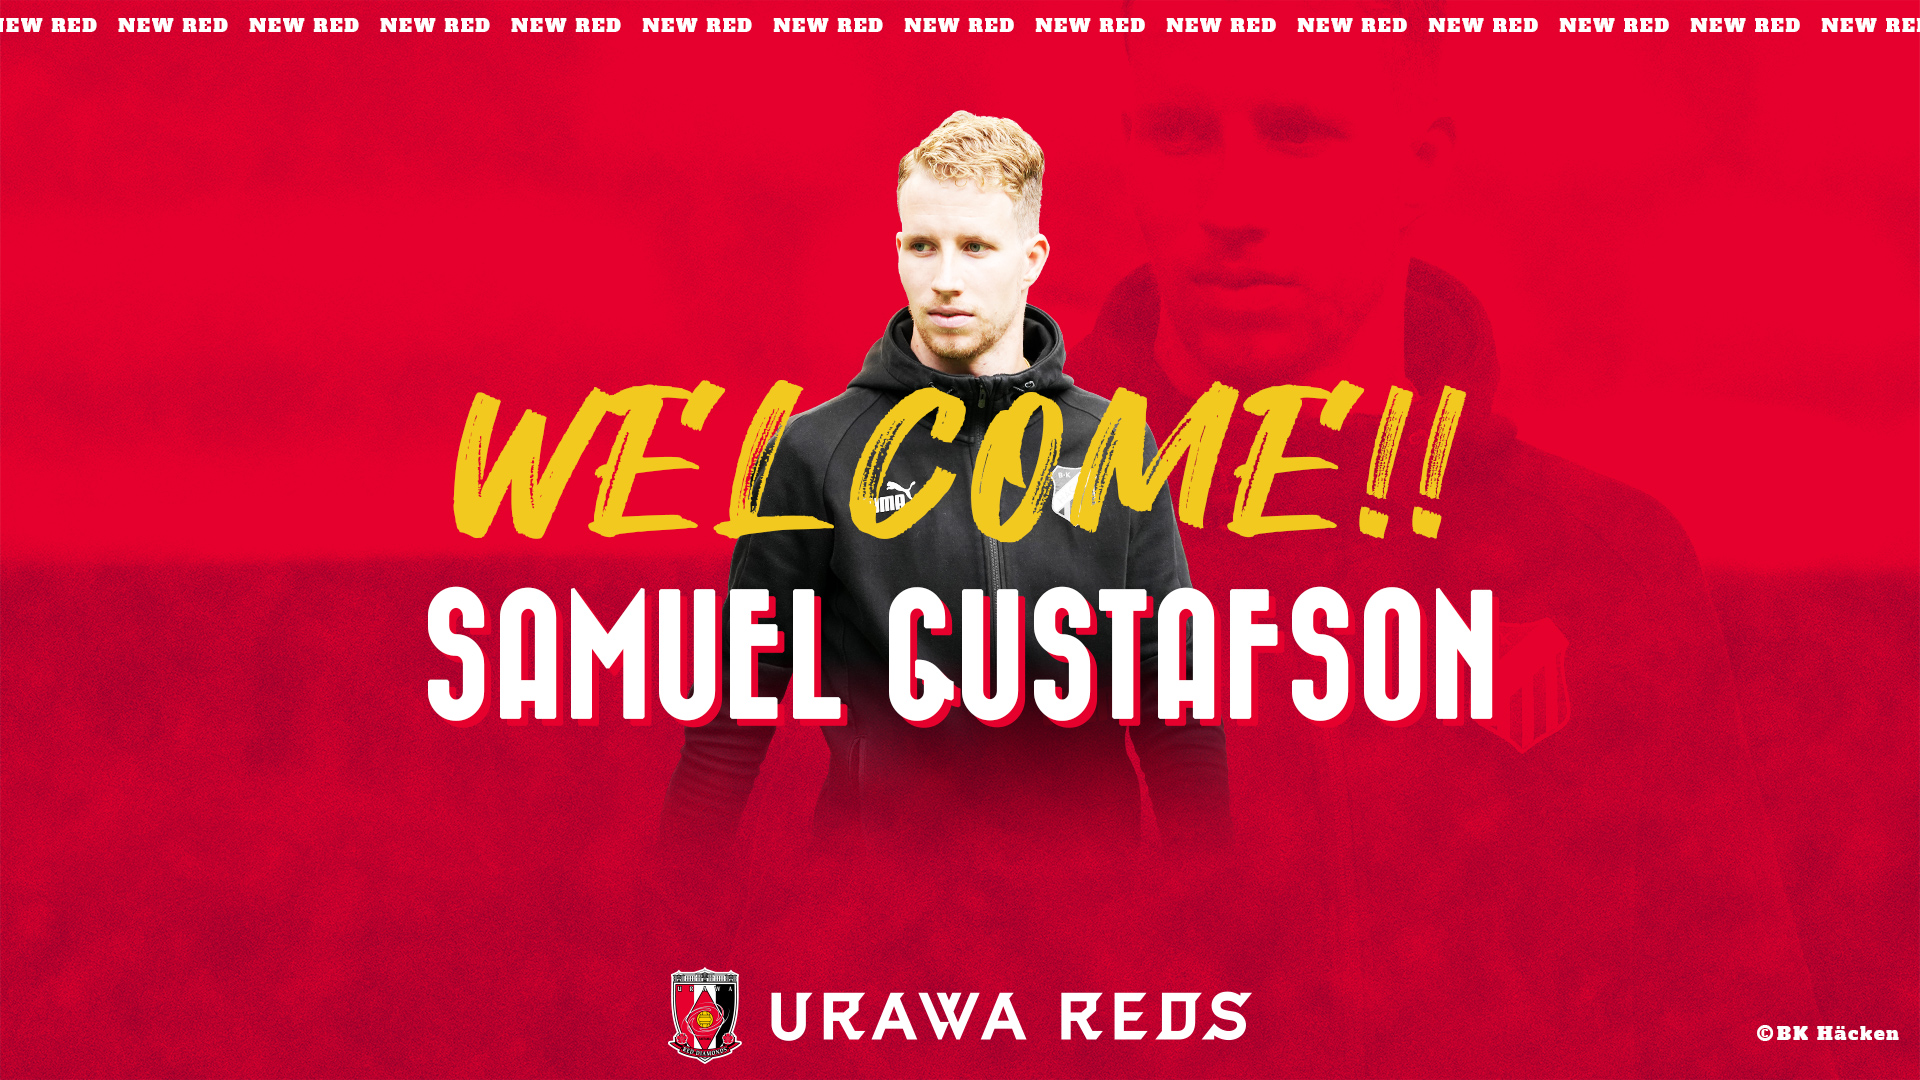 Notice of agreement between clubs to permanently transfer Samuel Gustafson